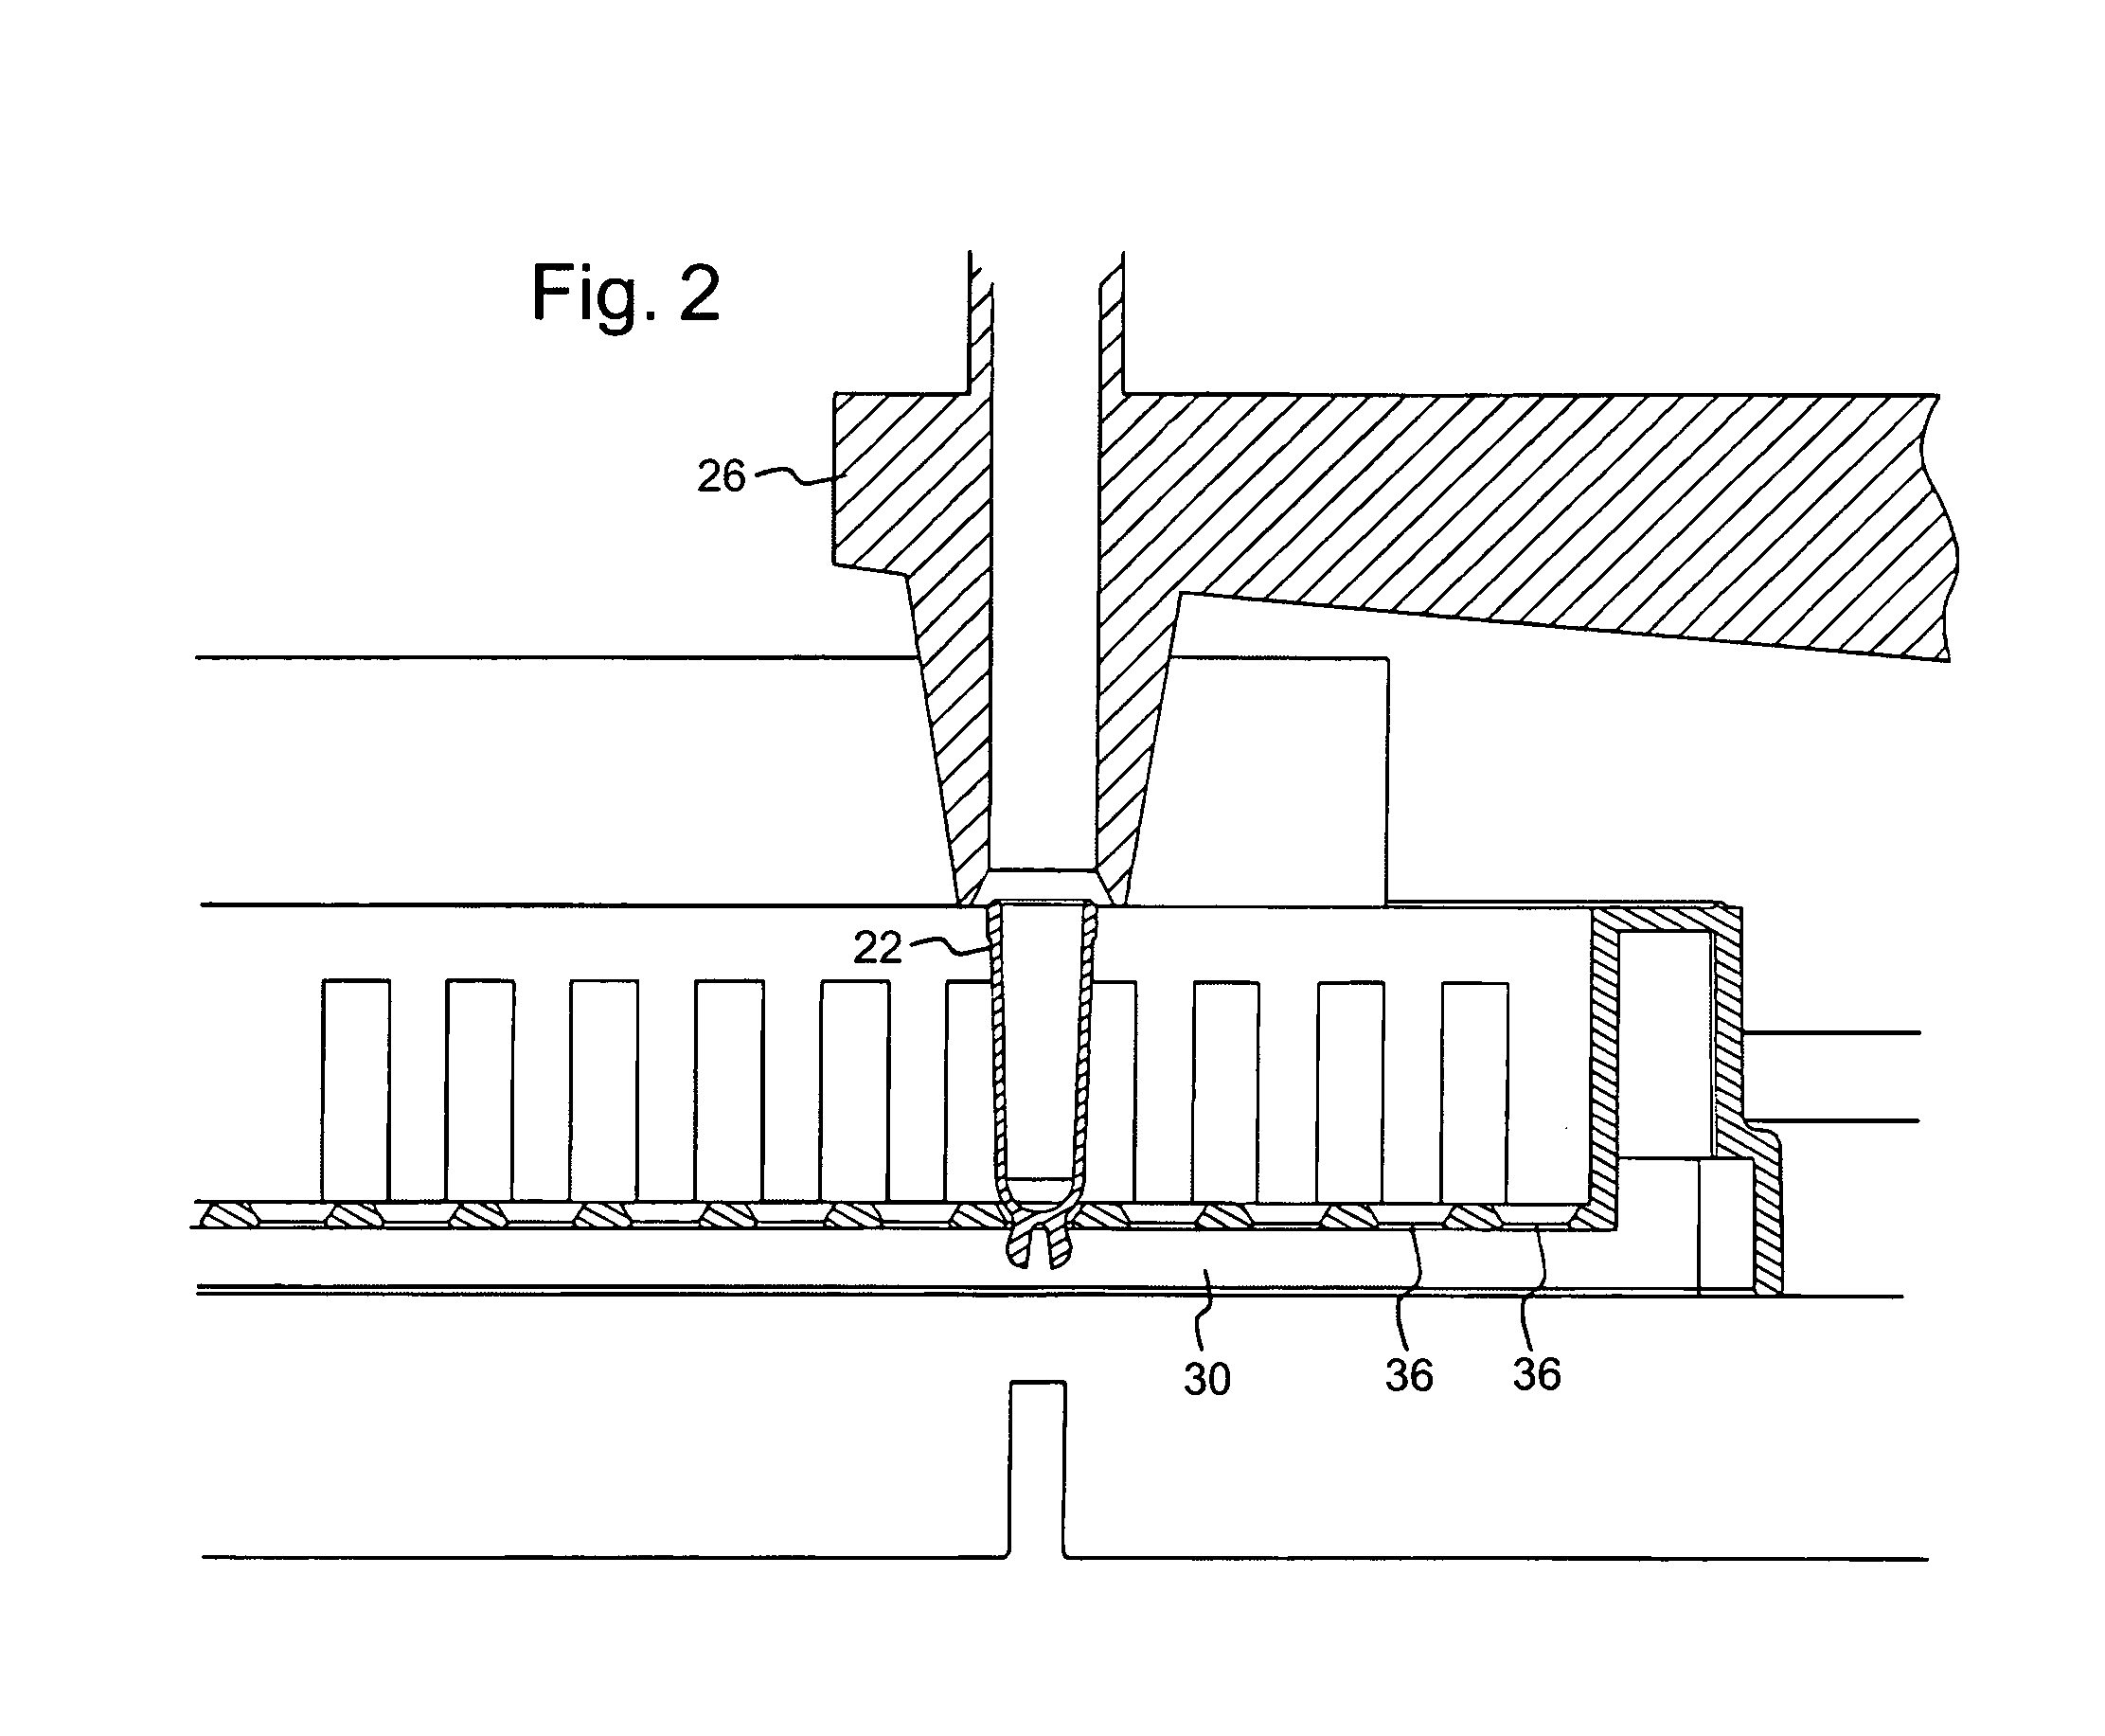 Method and apparatus for automated storage and retrieval of miniature shelf keeping units